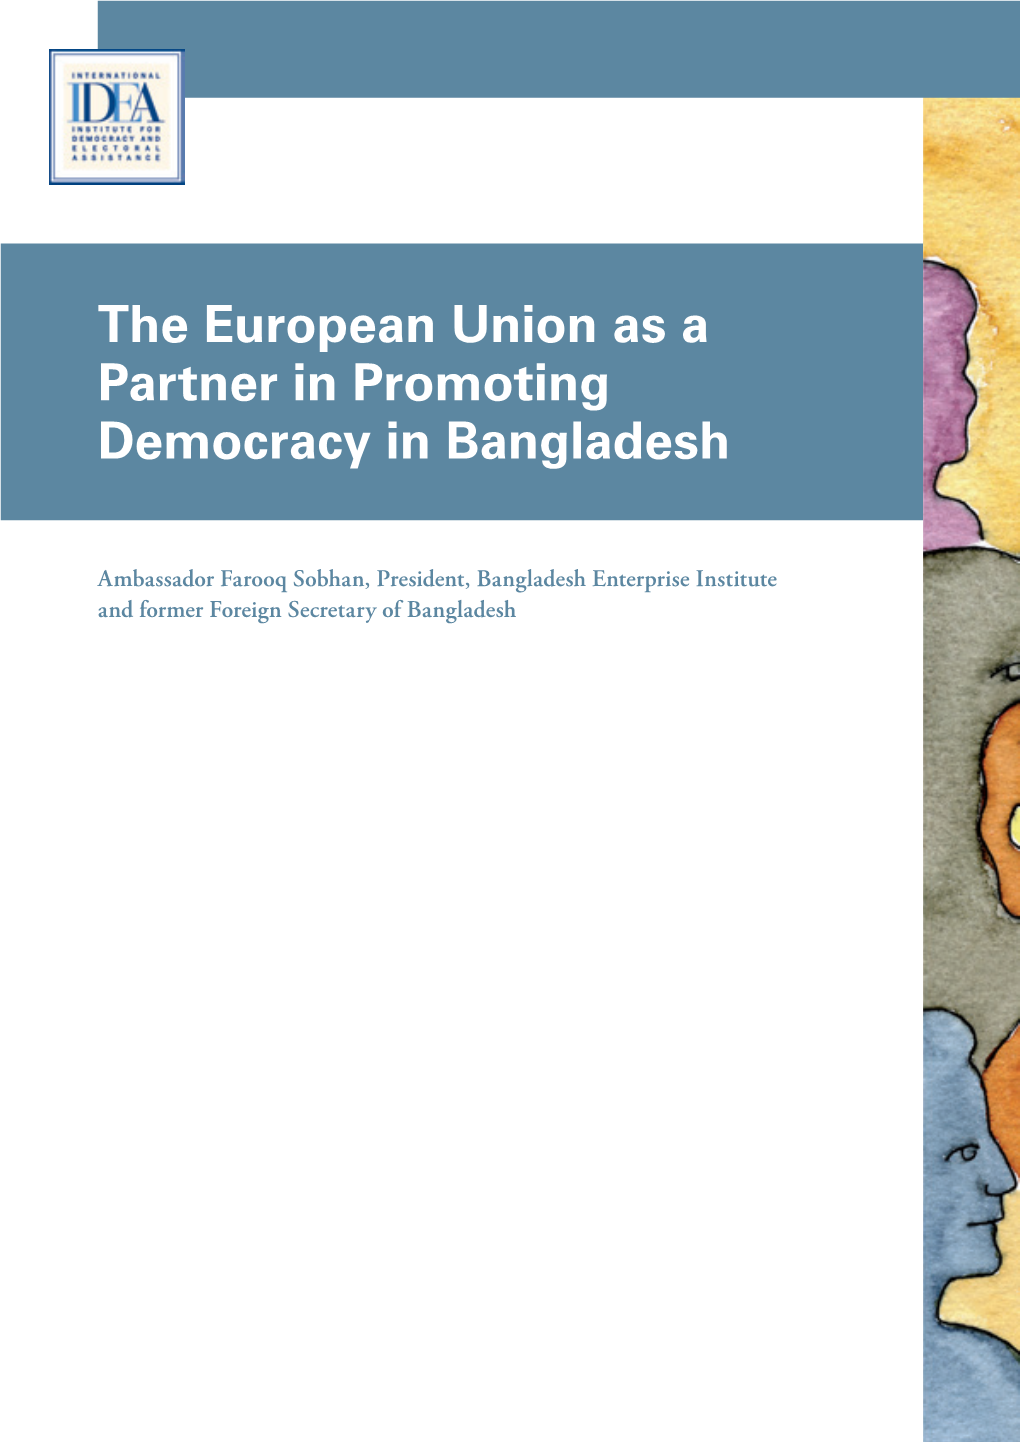 The European Union As a Partner in Promoting Democracy in Bangladesh